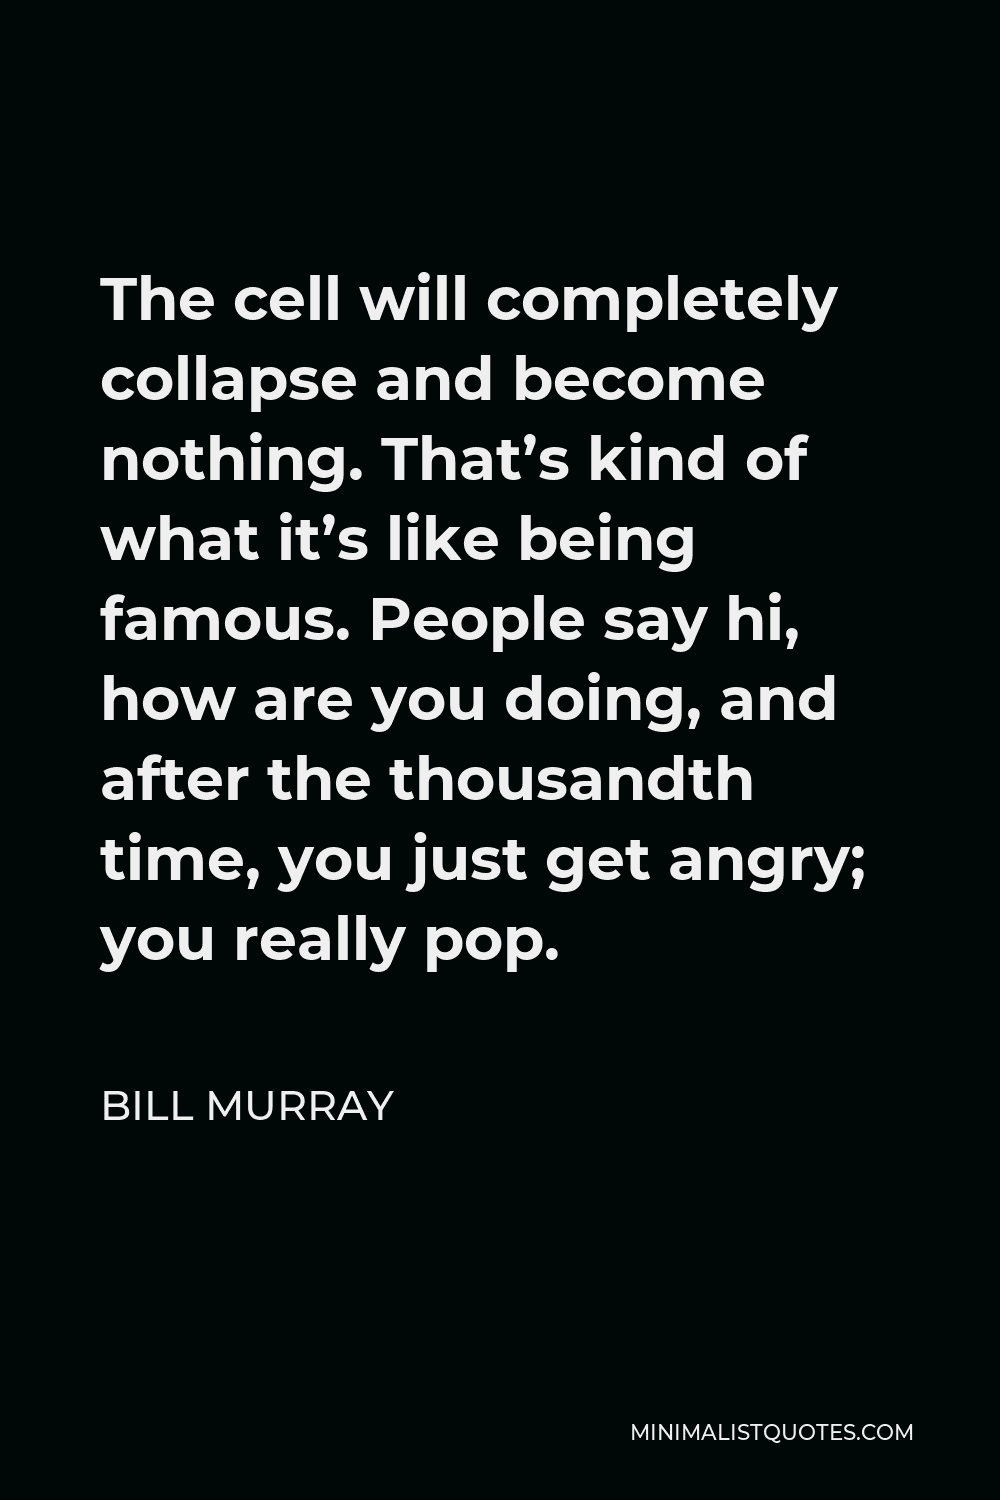 Bill Murray Quote - The cell will completely collapse and become nothing. That’s kind of what it’s like being famous. People say hi, how are you doing, and after the thousandth time, you just get angry; you really pop.